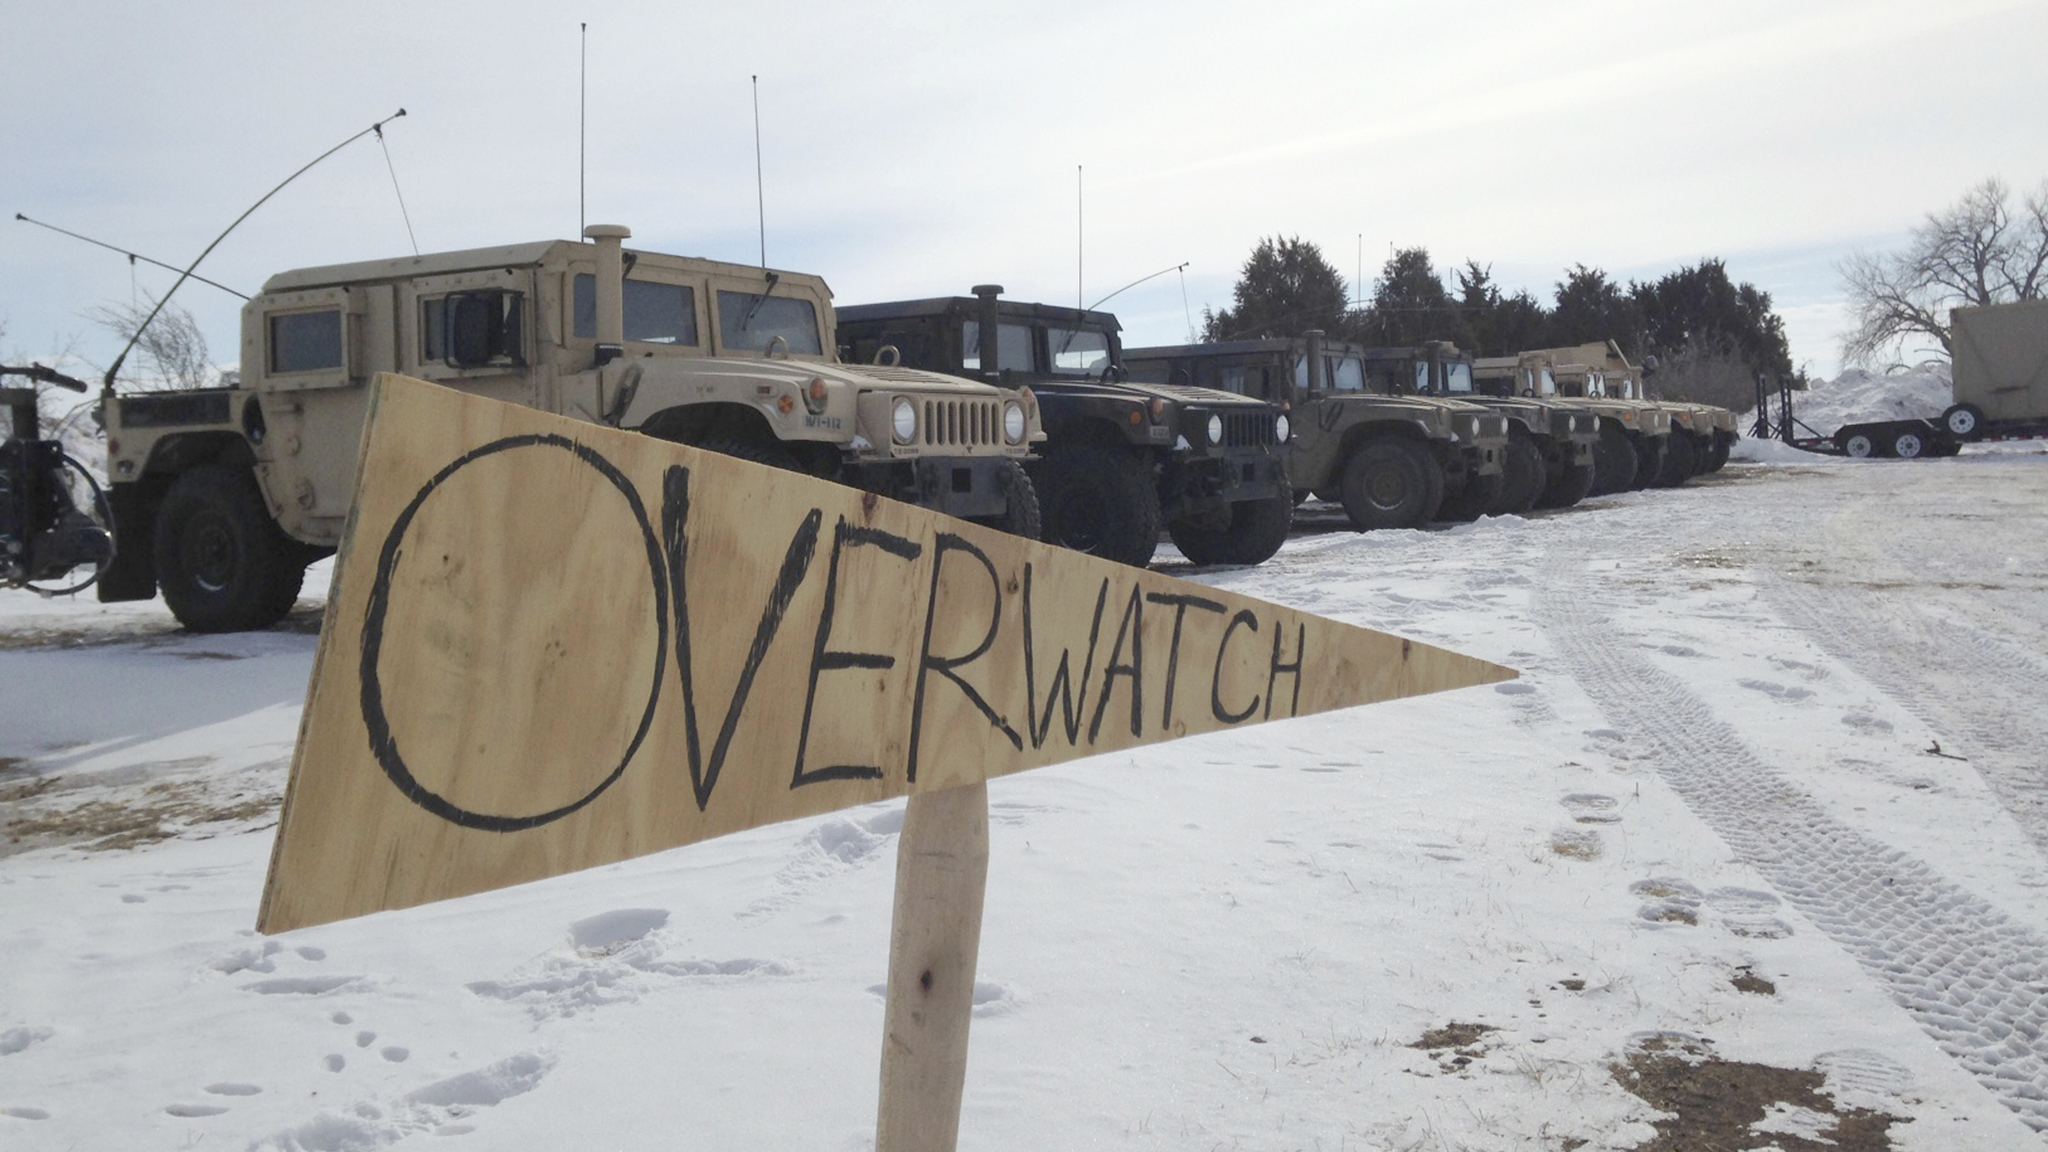 Military vehicles are staged near the path of the Dakota Access pipeline Thursday, Feb. 9, 2017 near Cannon Ball, North Dakota. The developer says construction of the Dakota Access pipeline under a North Dakota reservoir has begun and that the full pipeline should be operational within three months. One of two tribes who say the pipeline threatens their water supply on Thursday filed a legal challenge asking a court to block construction while an earlier lawsuit against the pipeline proceeds. (James MacPherson | The Associated Press)